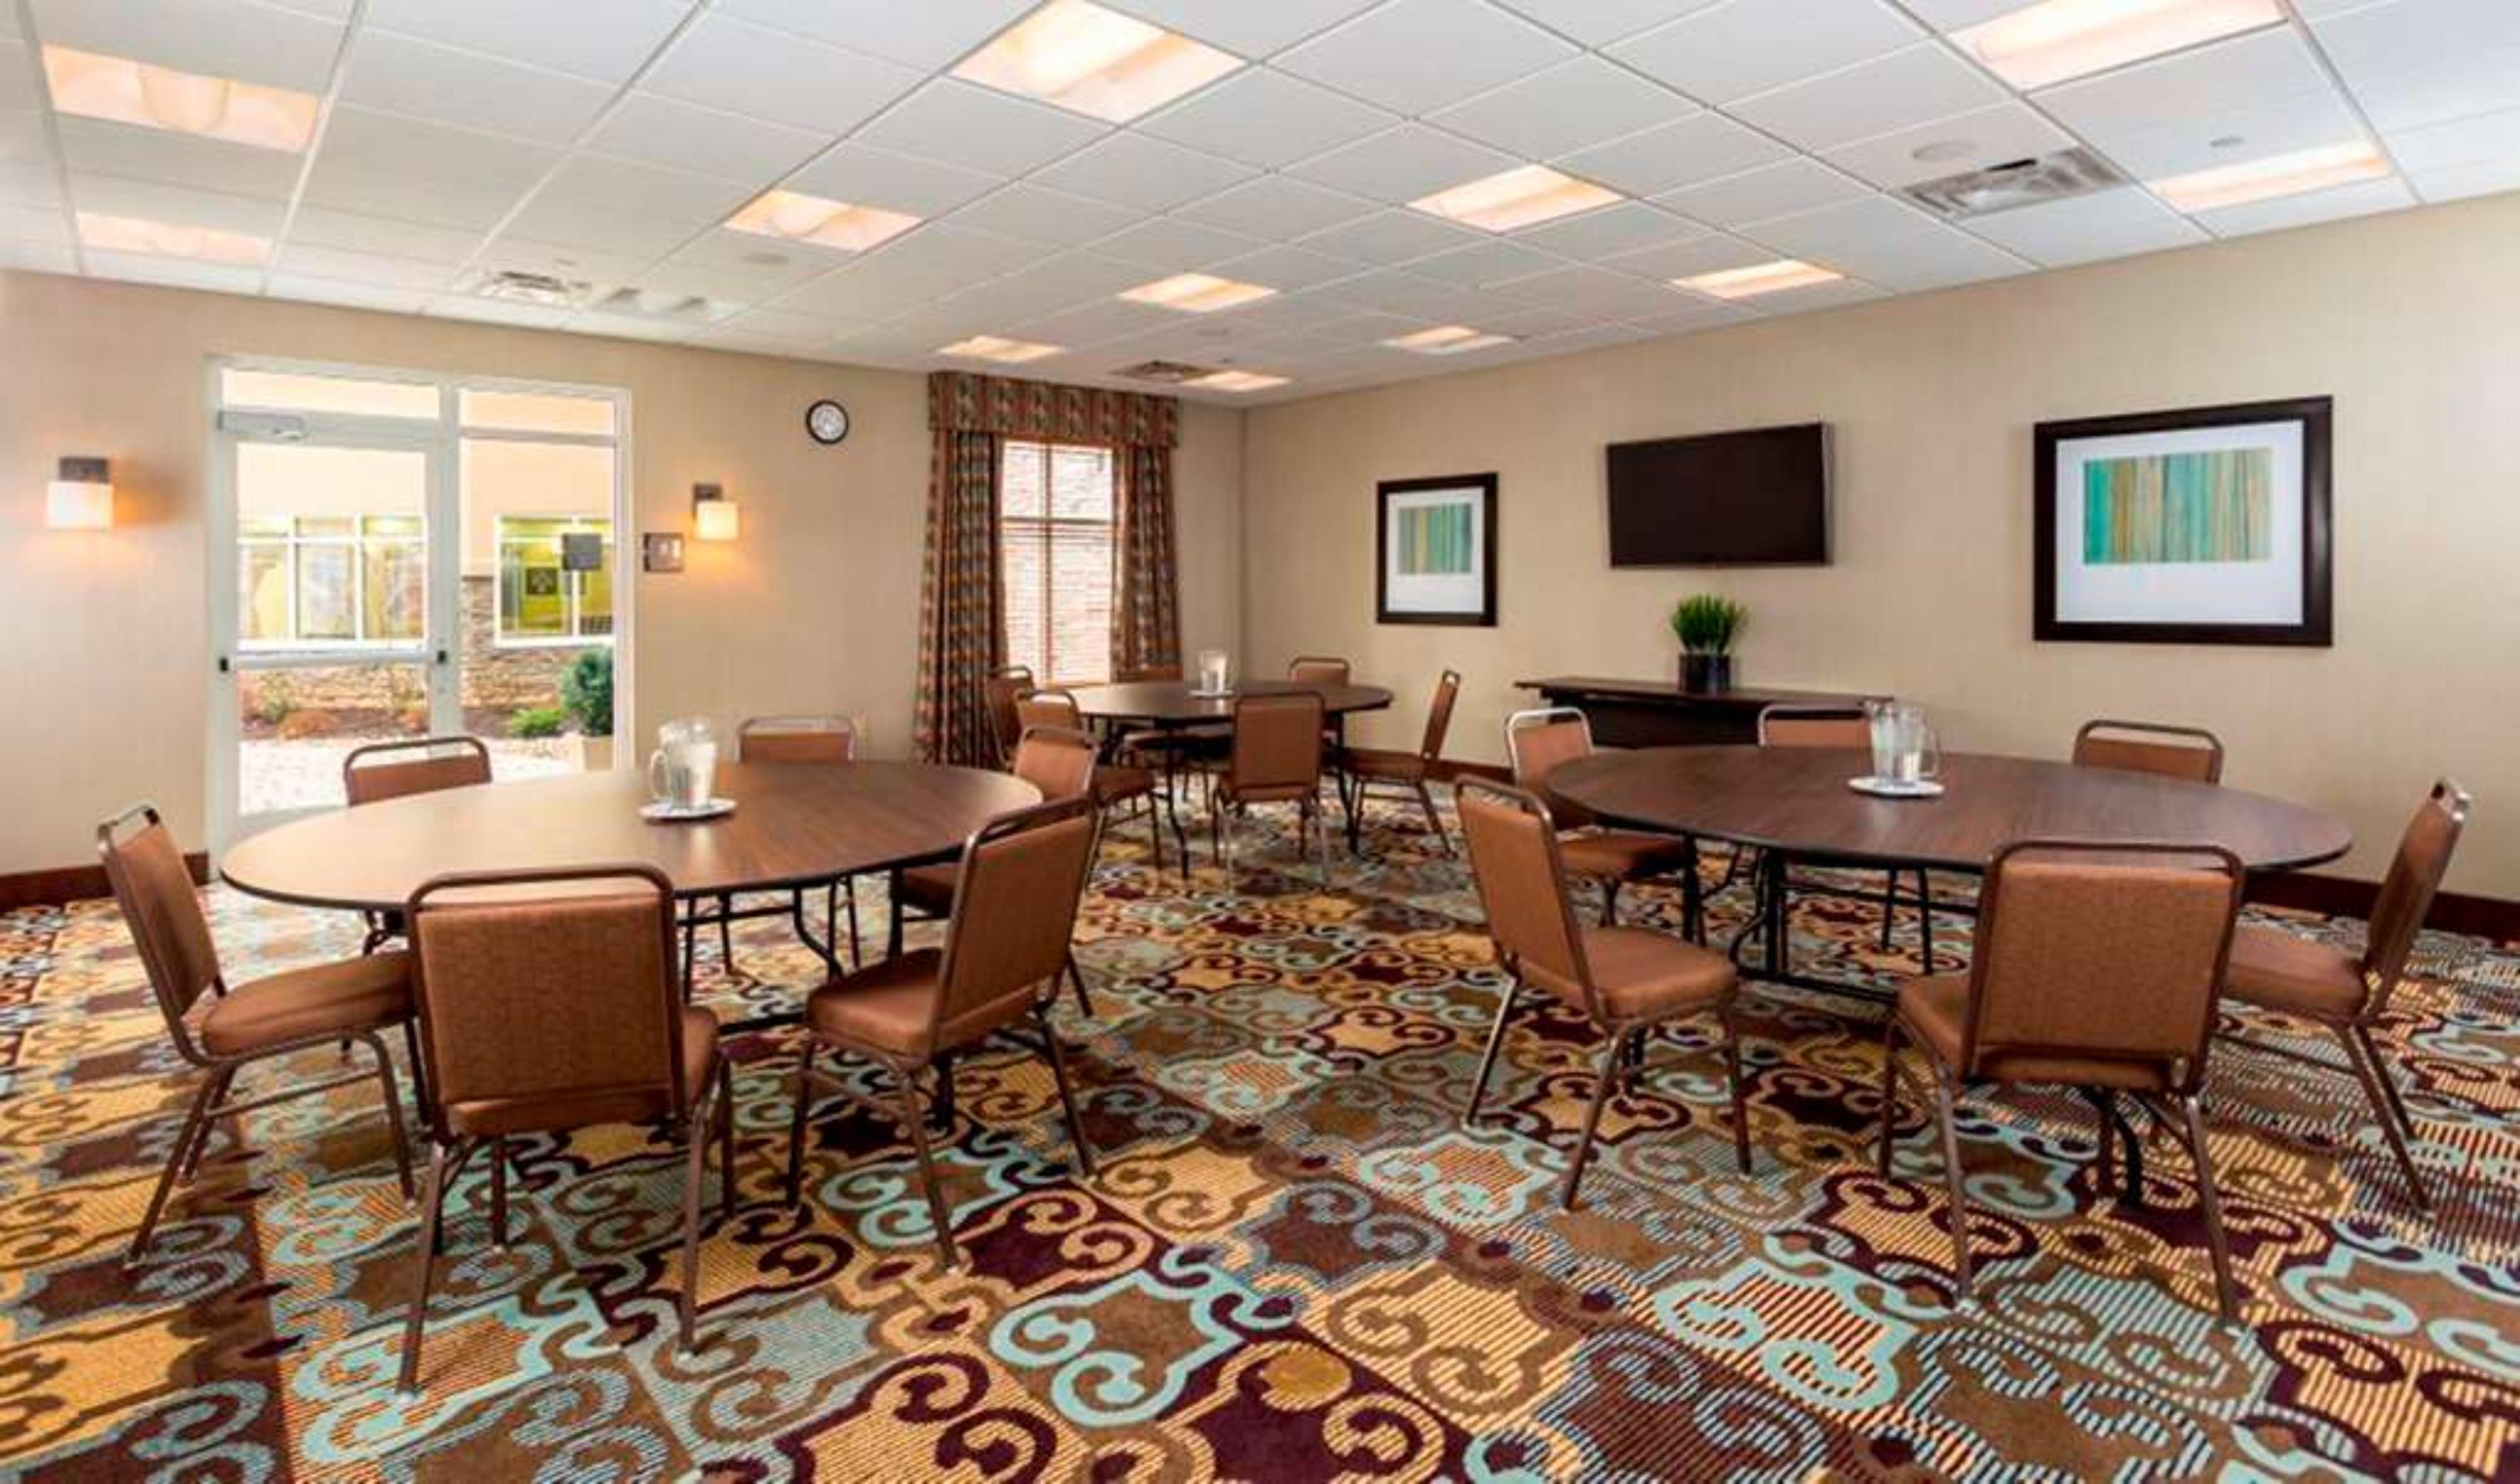 Homewood Suites by Hilton Akron Fairlawn, OH